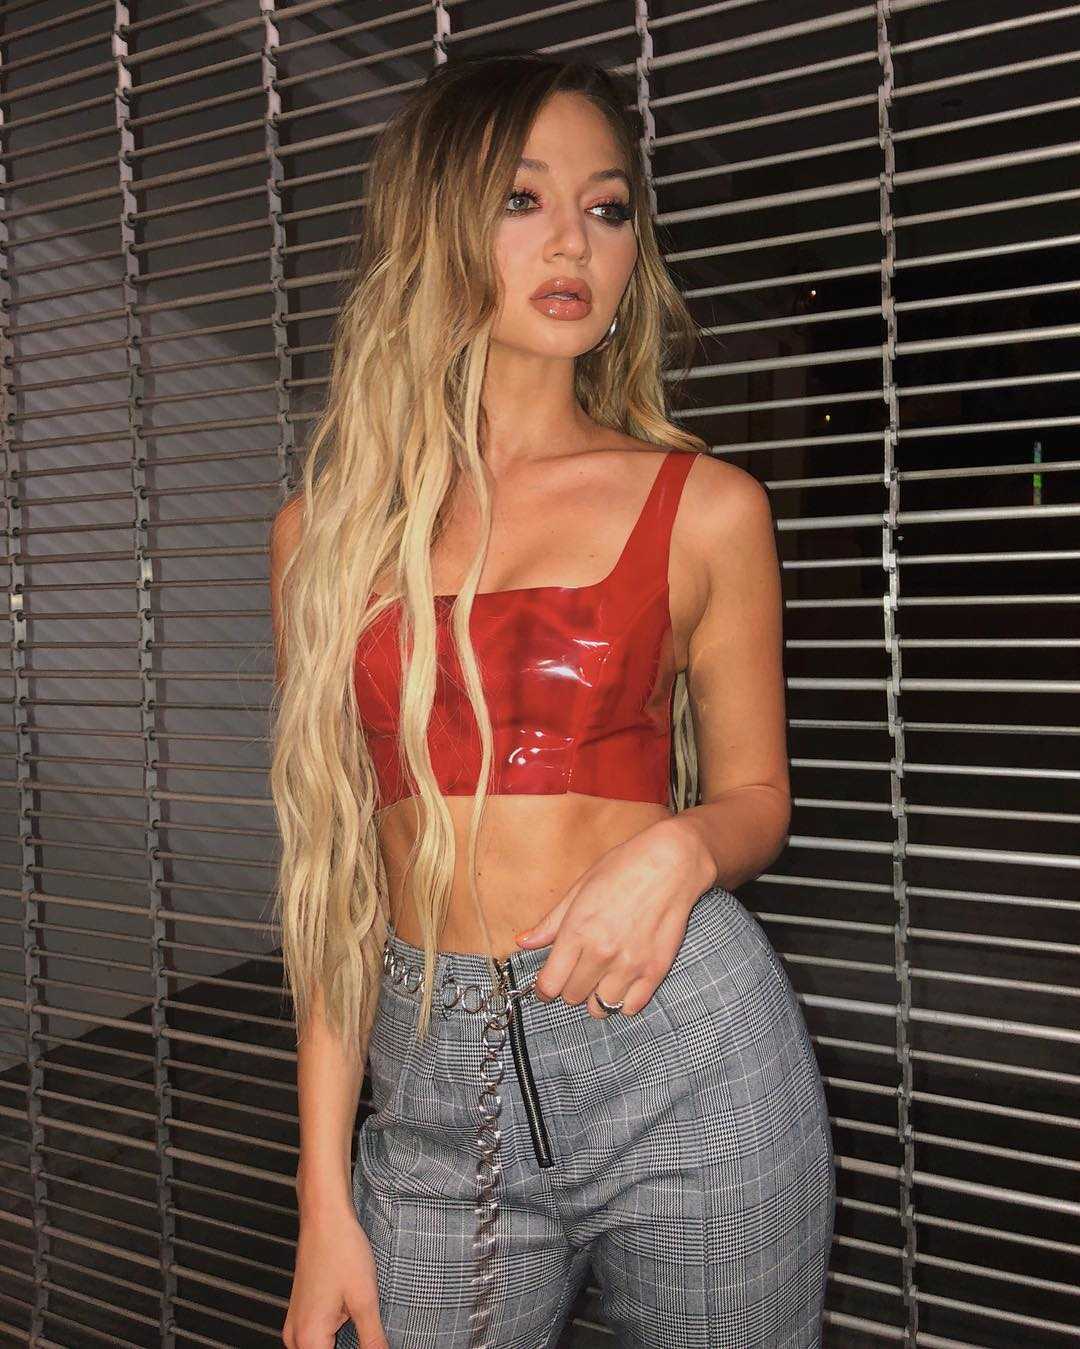 51 Hottest Erika Costell Big Butt Pictures That Will Make You Begin To Look All Starry Eyed At Her | Best Of Comic Books